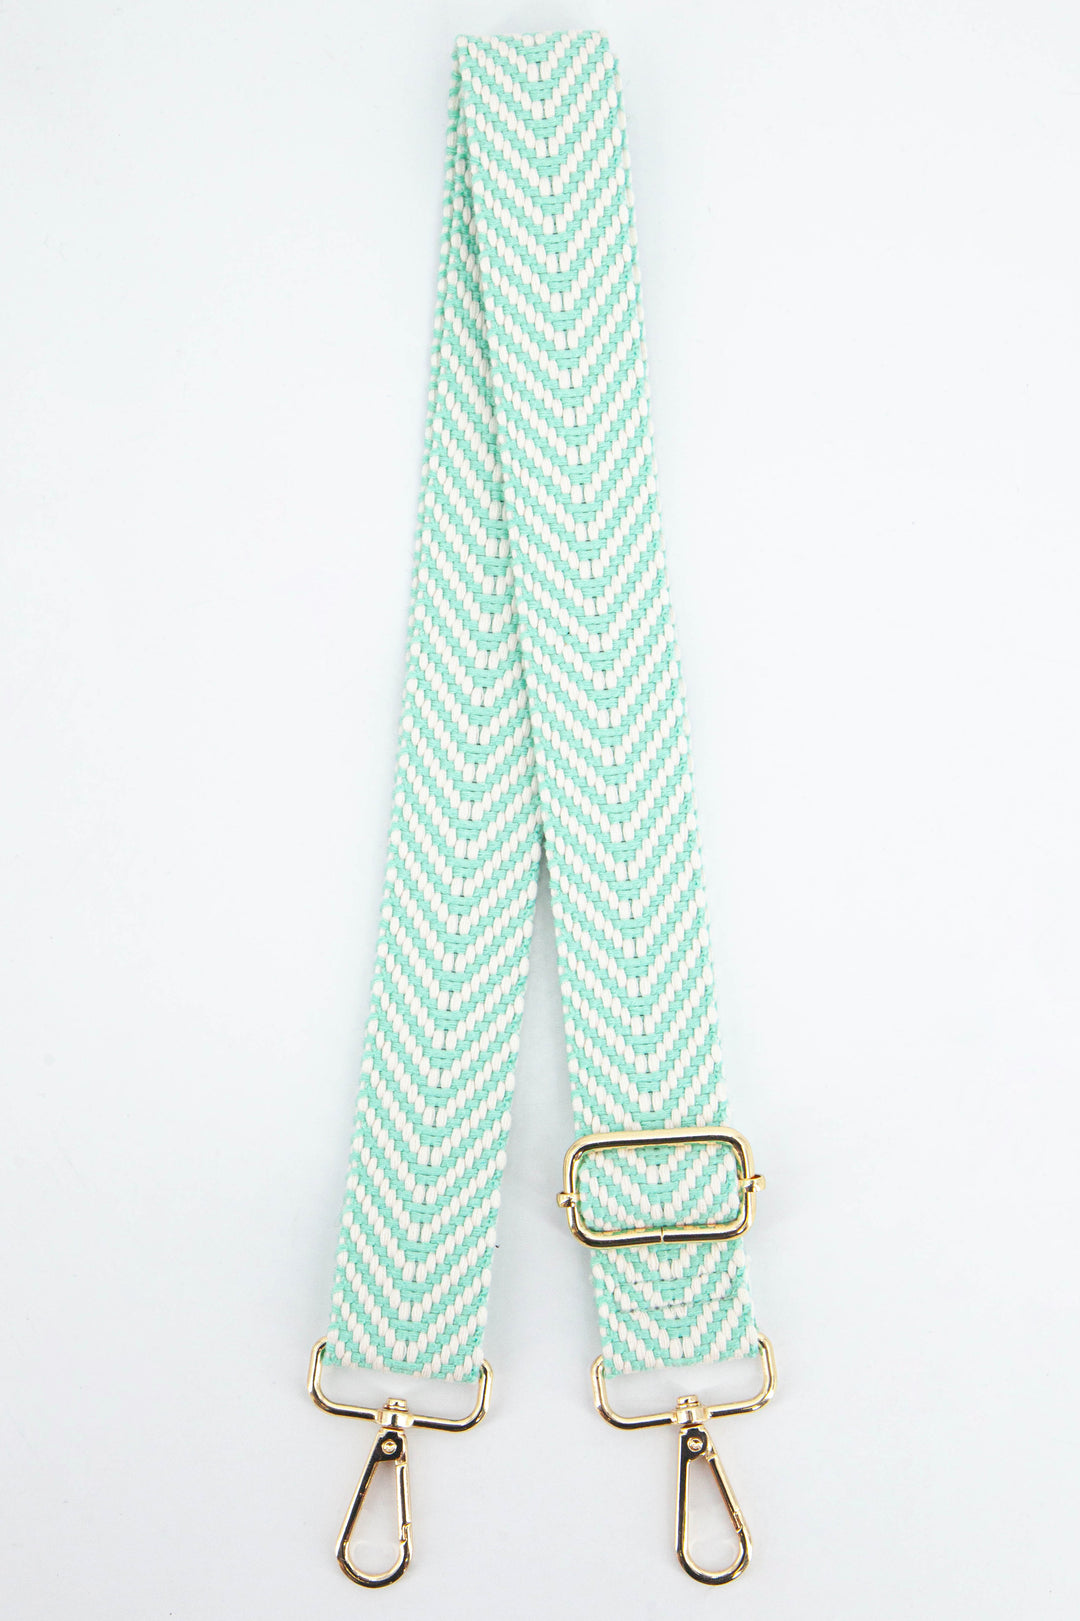 mint green and beige woven chevron pattern adjustable bag strap with gold snap hook attachments